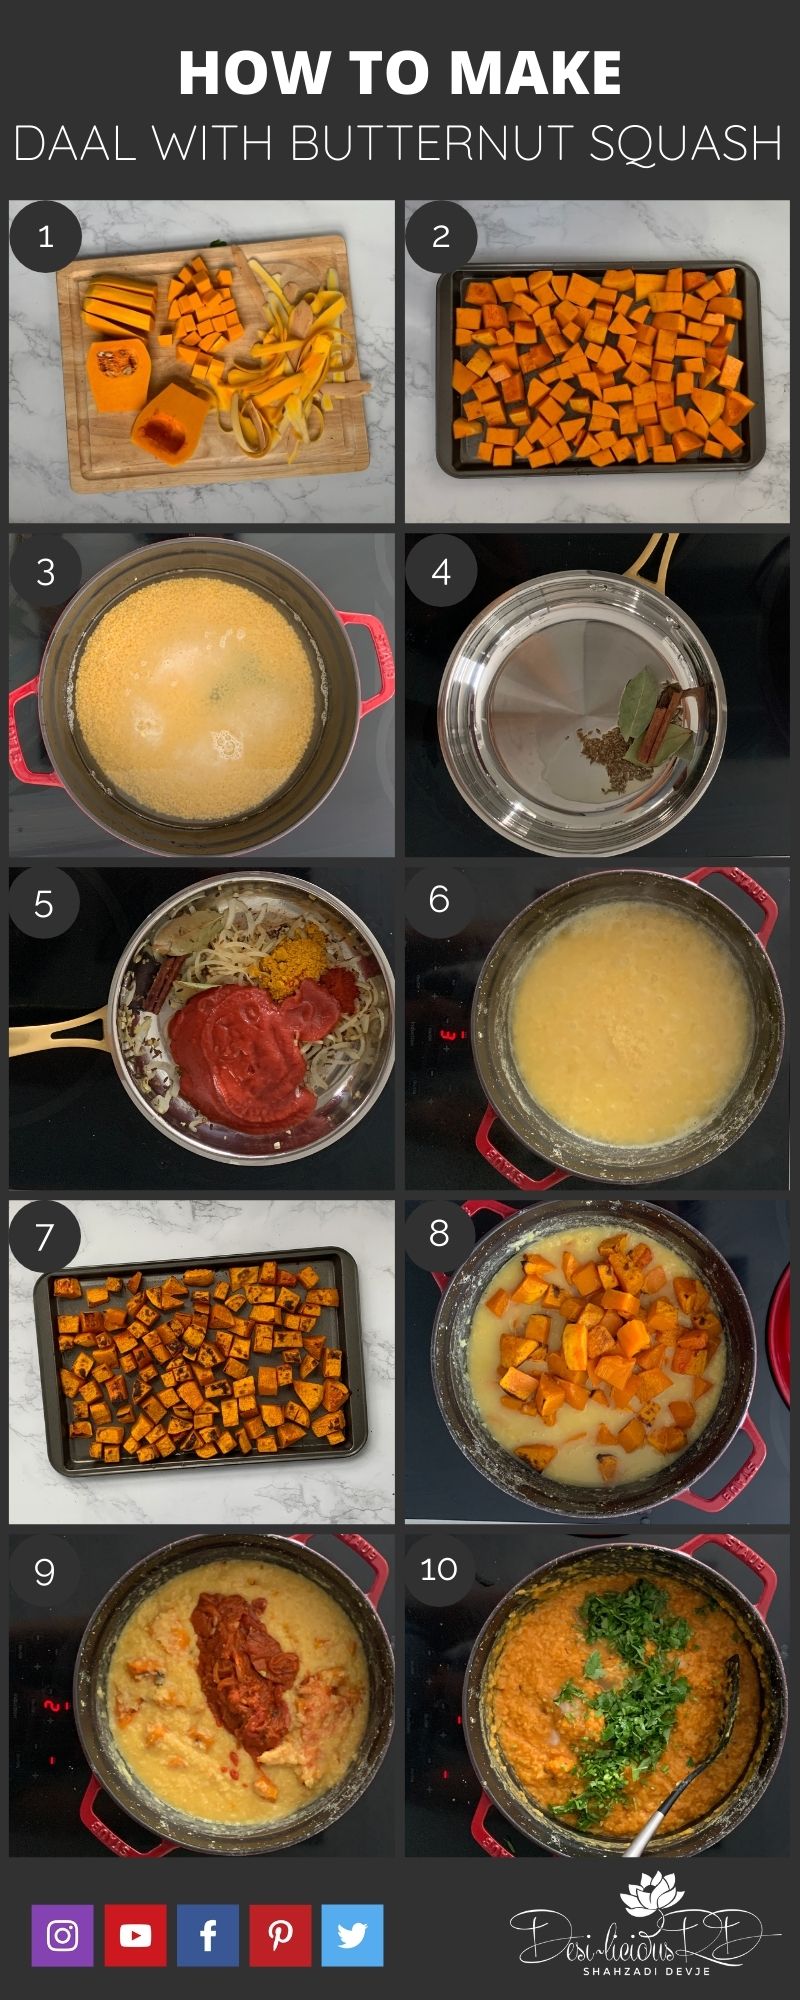 step by step preparation shots of how to make daal (aka yellow mung daal)